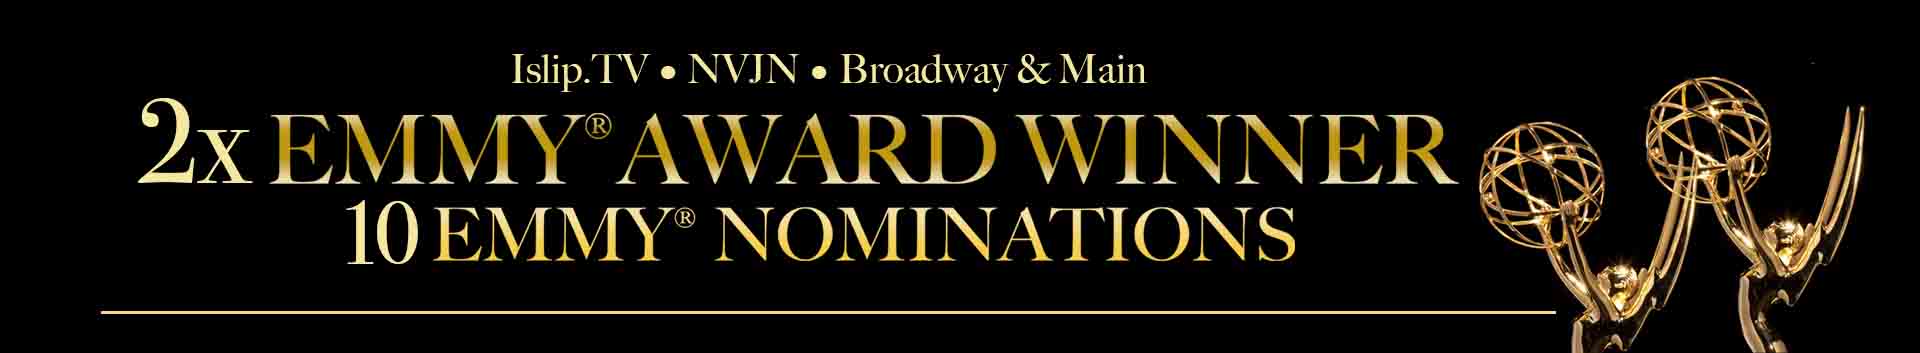 Broadway and Main 2x emmy Award Winner - 10 Emmy Nominations